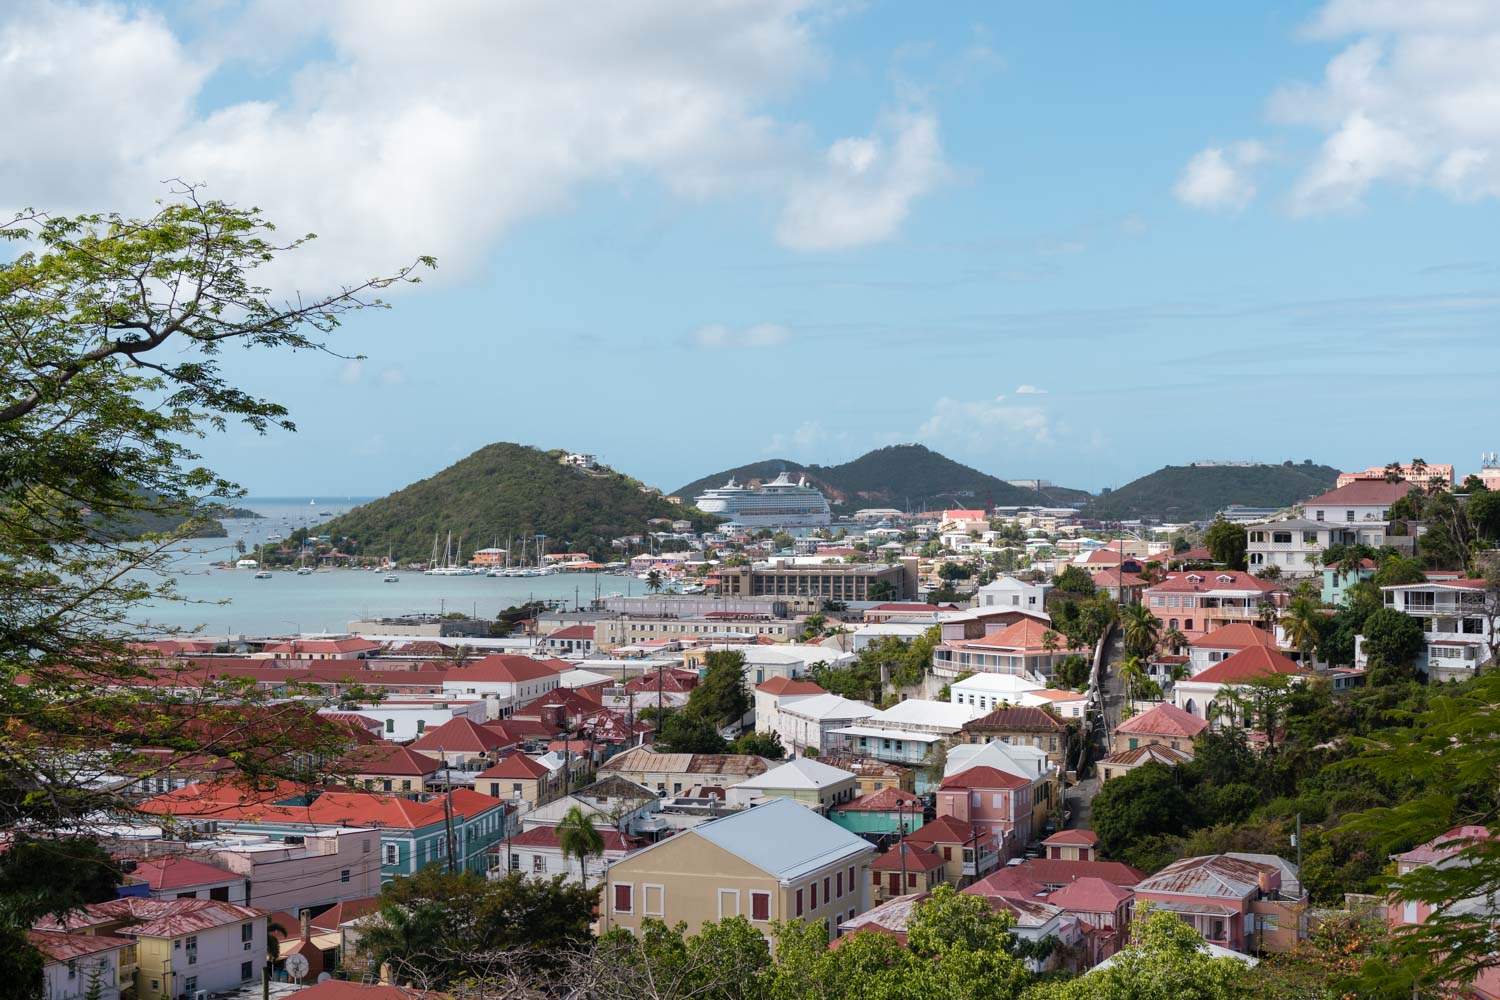 A view of Charlotte Amalie, the capital city of St. Thomas.